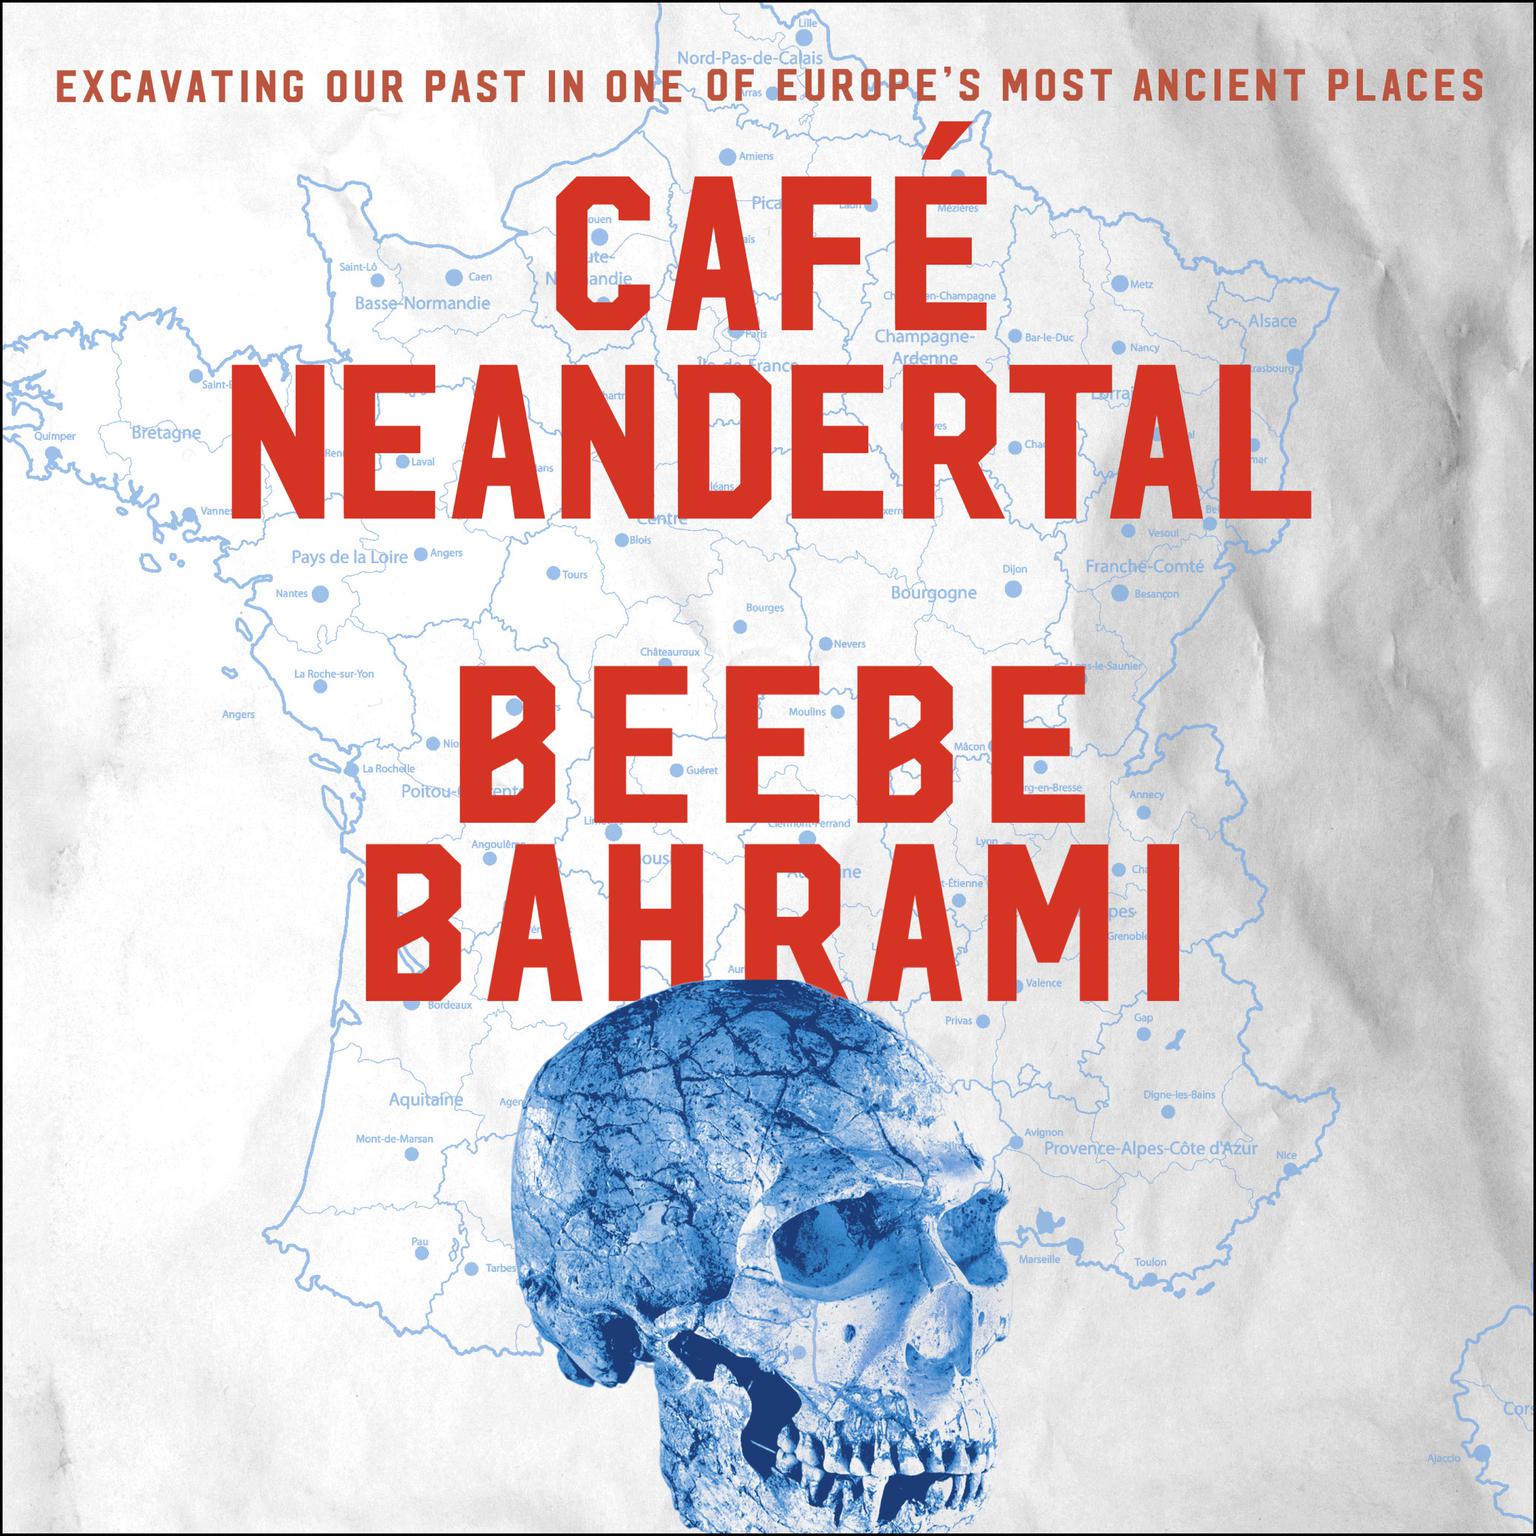 Cafe Neandertal: Excavating Our Past in One of Europes Most Ancient Places Audiobook, by Beebe Bahrami